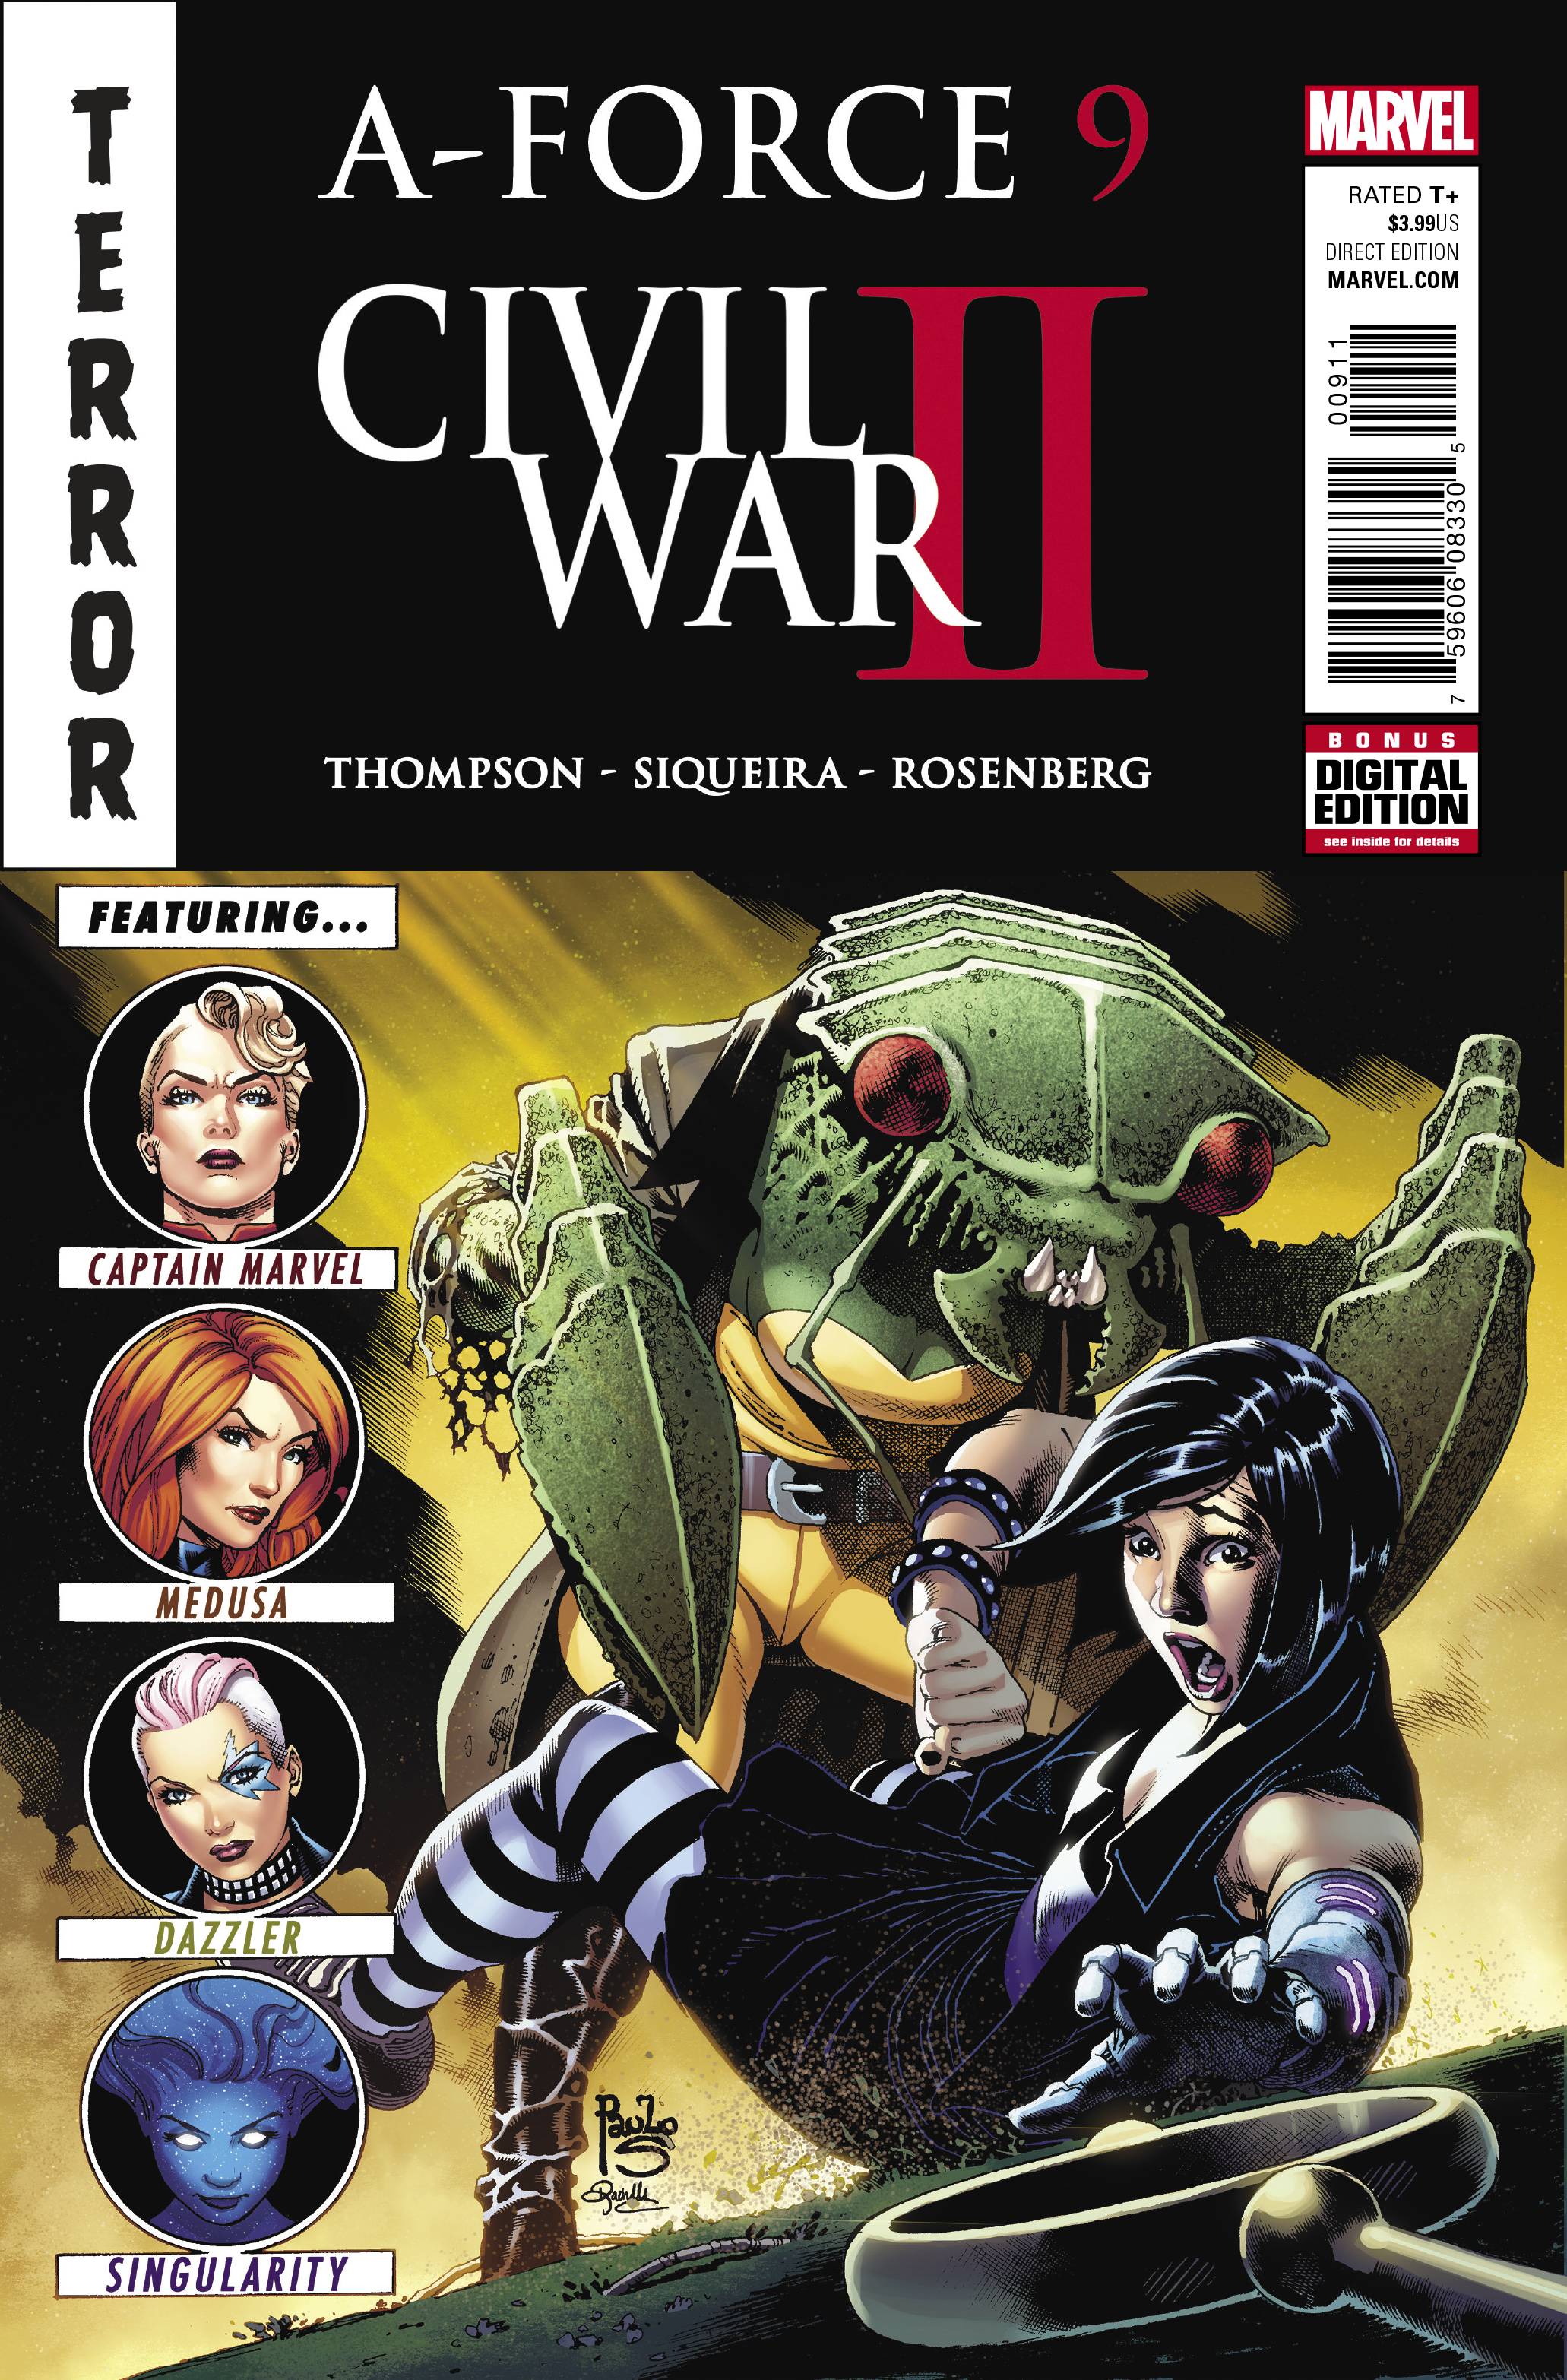 A-Force (2nd Series) 9 Comic Book